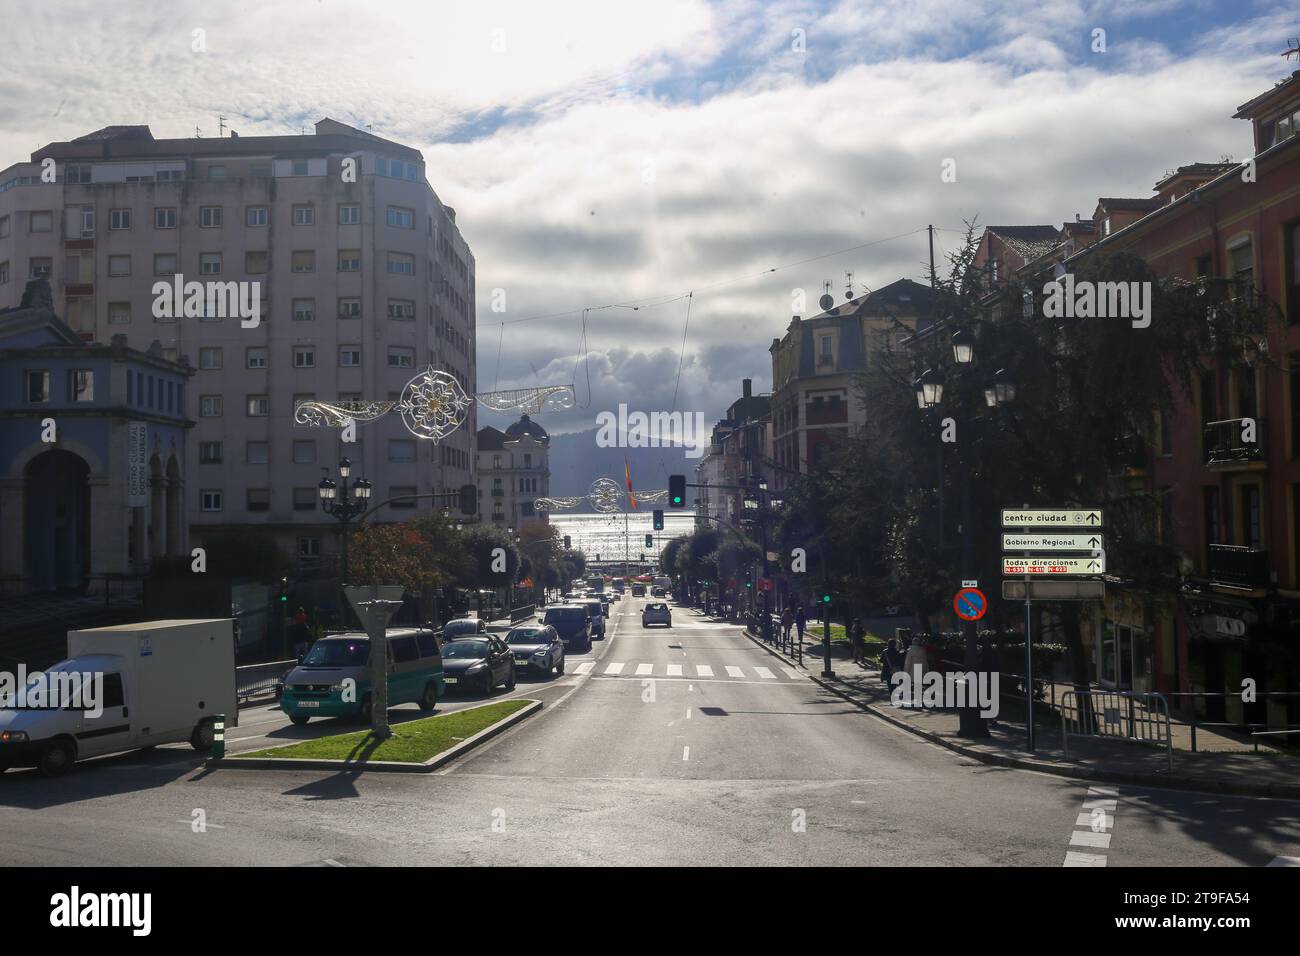 Santander, Spain, November 25, 2023: View of a street in Santander with the Cantabrian Sea in the background during Daily Life in Santander, on November 25, 2023, in Santander, Spain. Credit: Alberto Brevers / Alamy Live News. Stock Photo